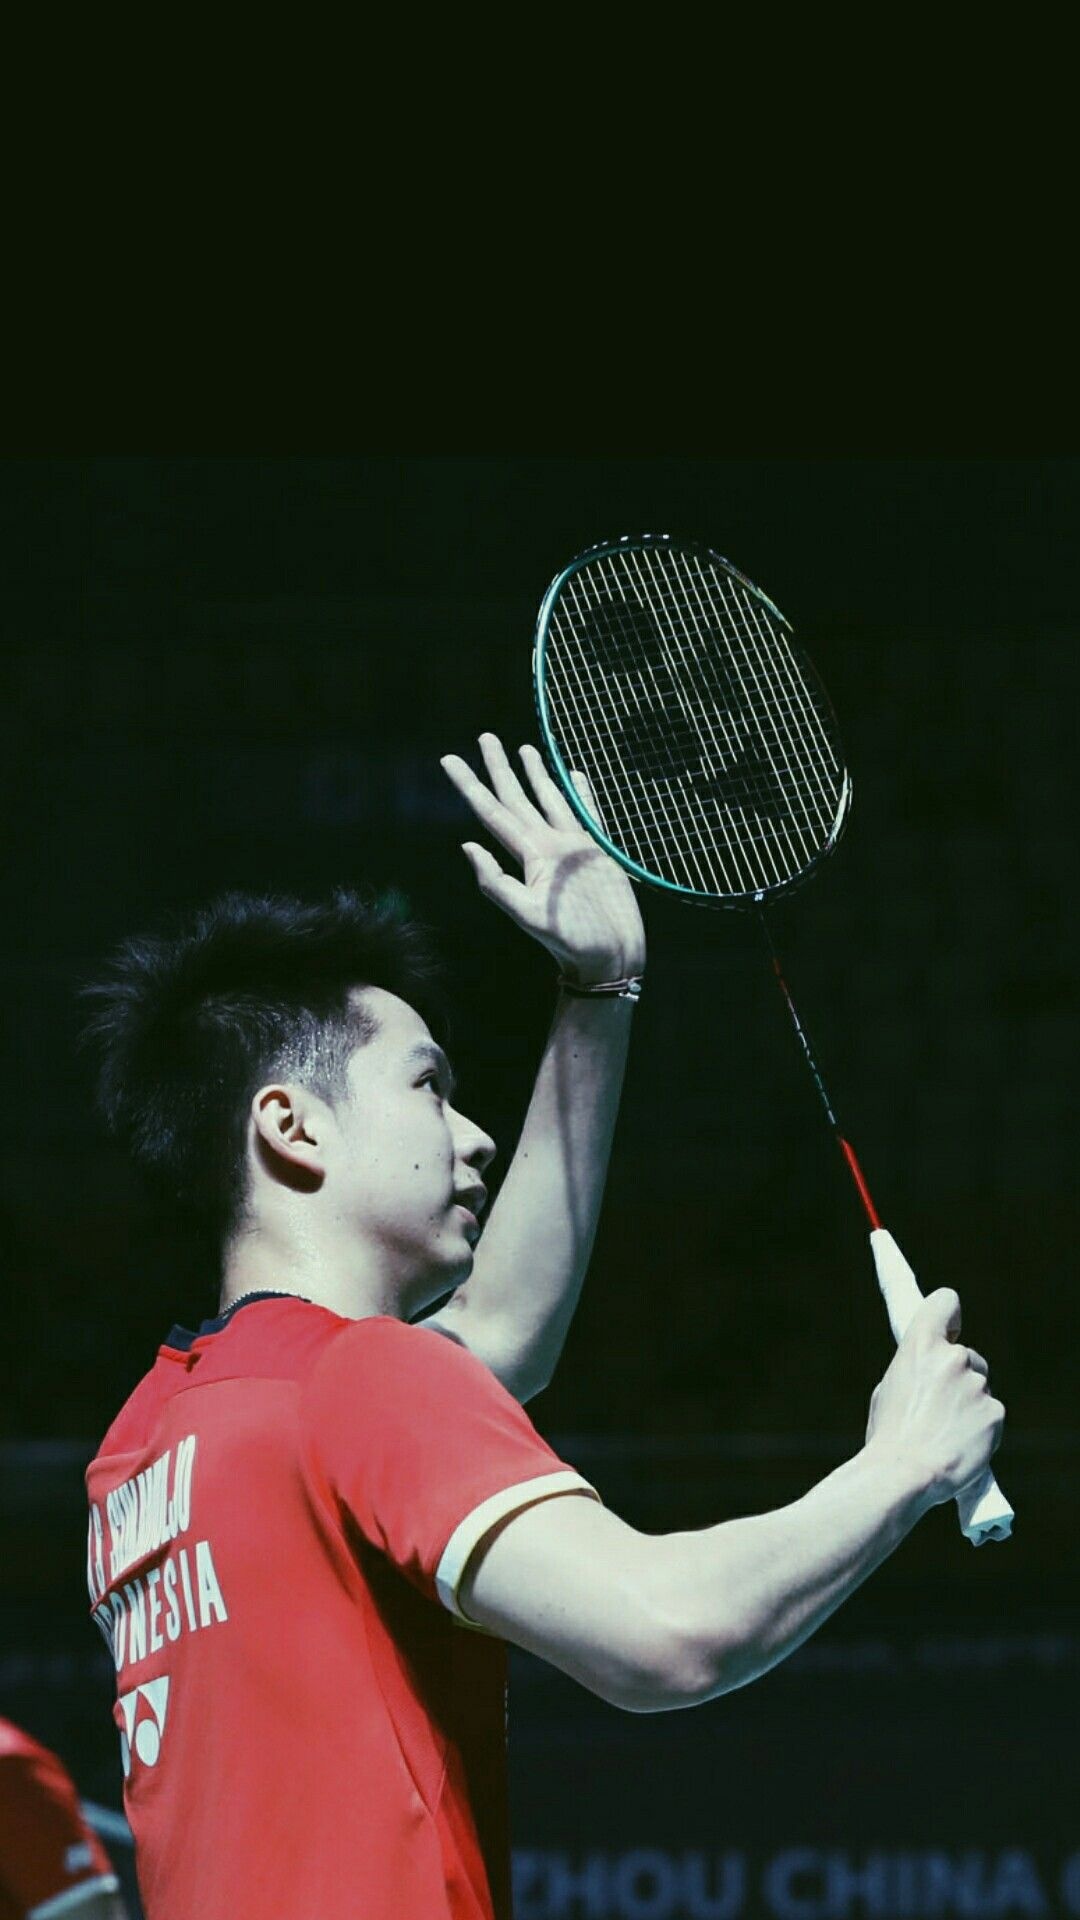 Olahraga badminton aesthetic wallpaper, Stylish sports photography, Artistic sports visuals, Aesthetically pleasing images, 1080x1920 Full HD Handy